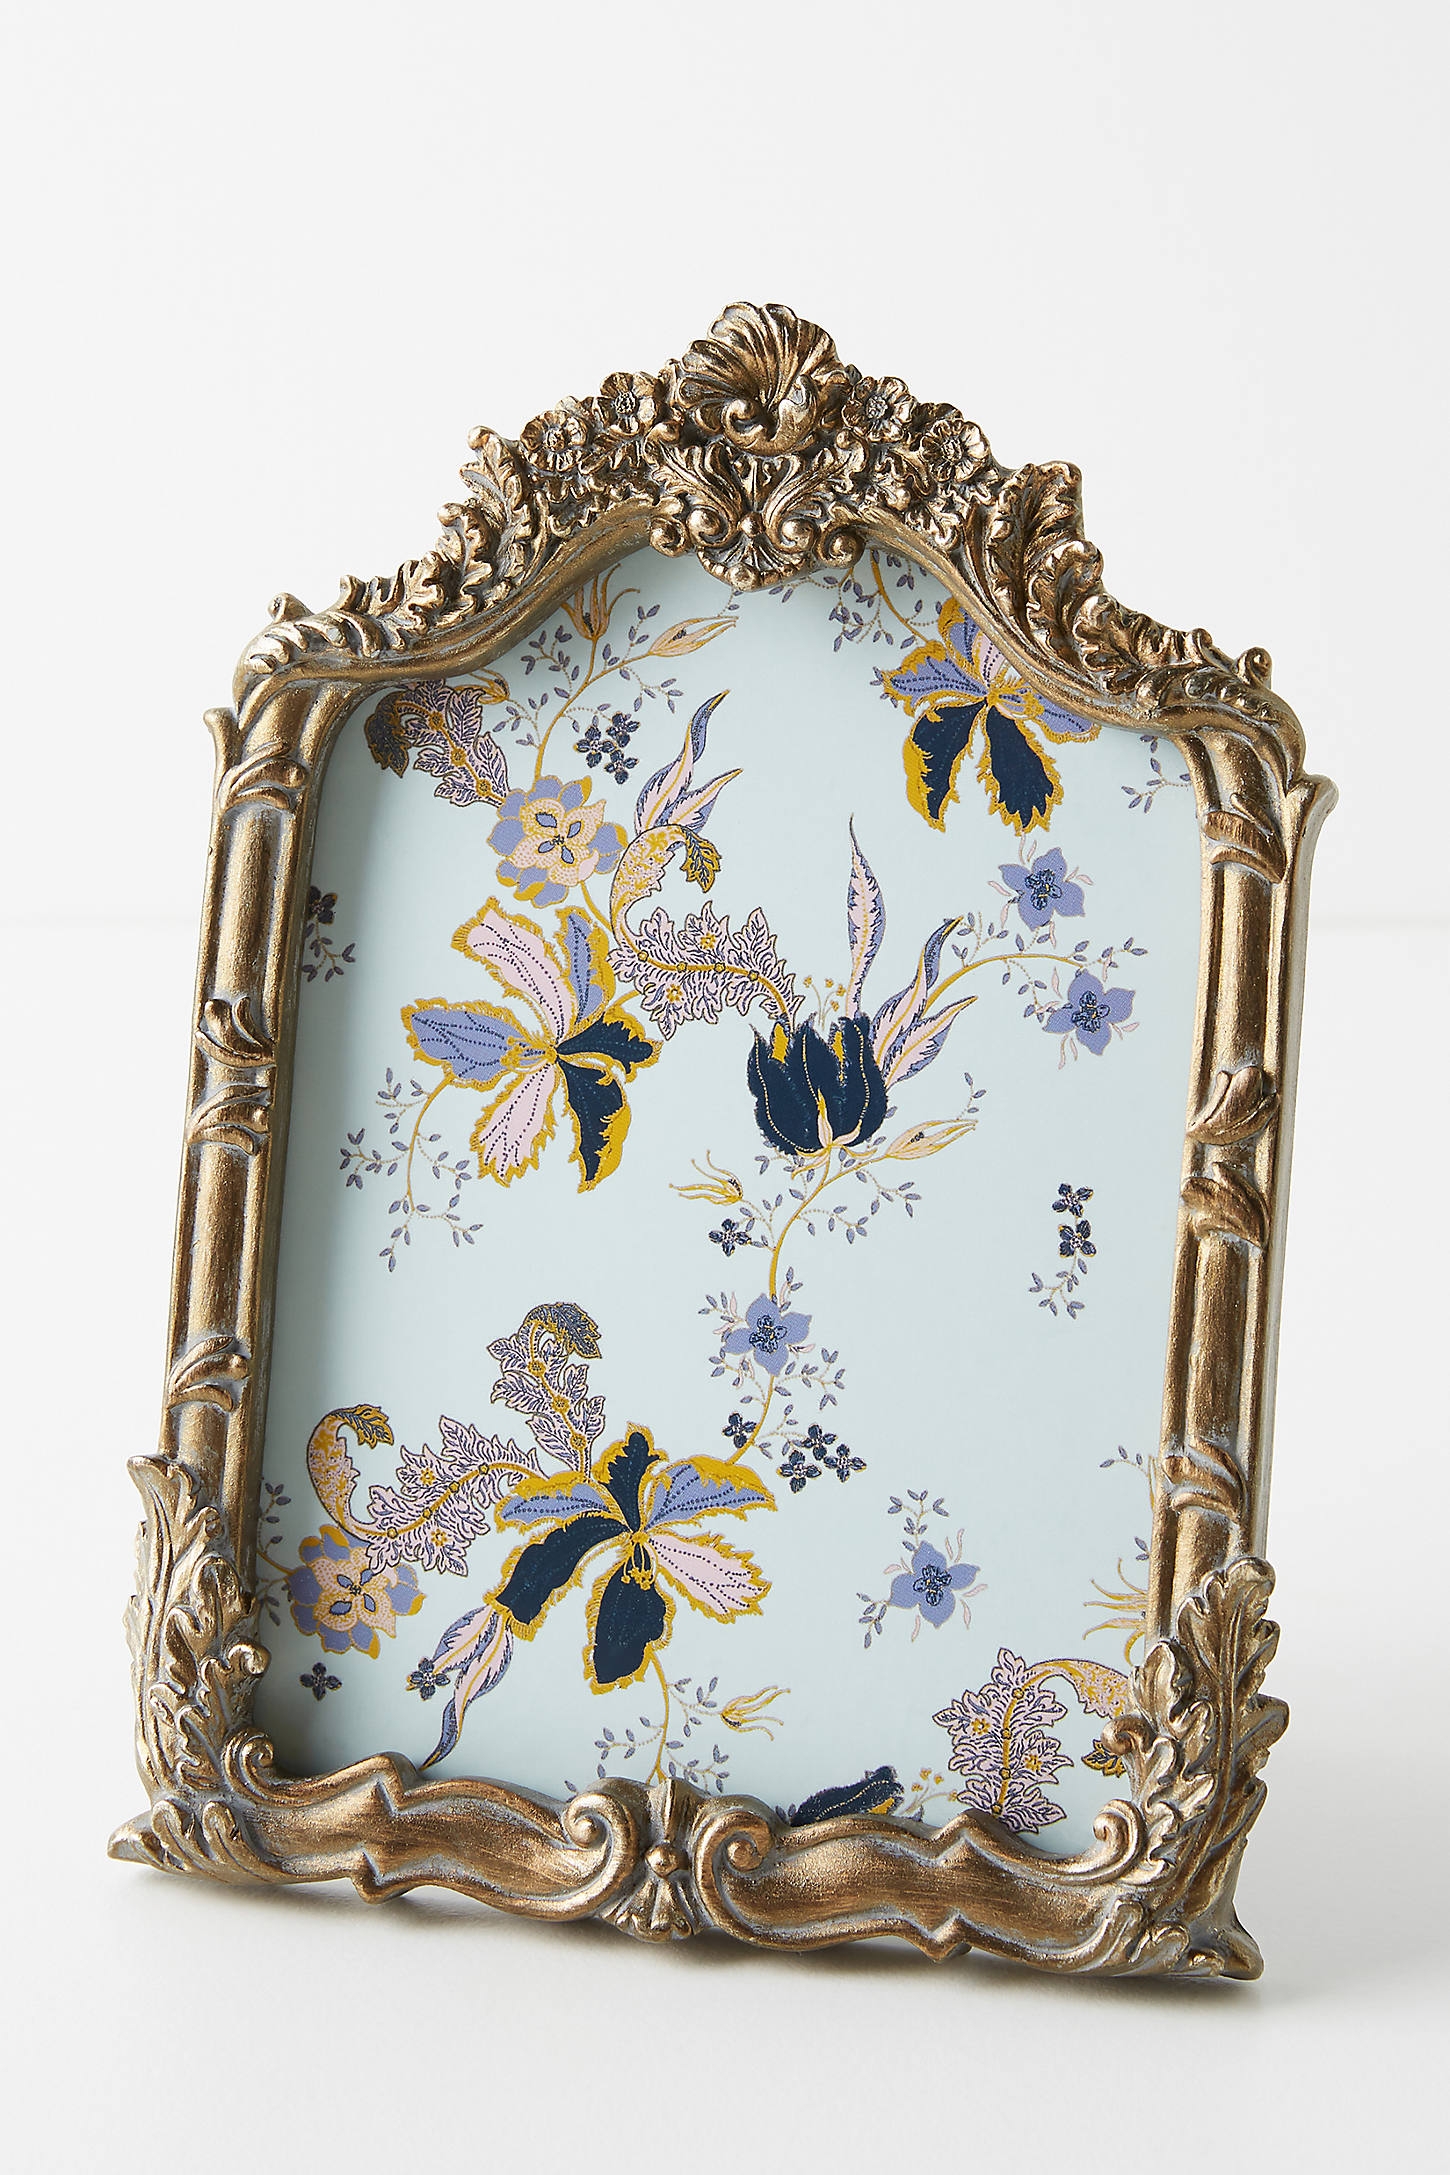 Victoria Frame By Anthropologie in Gold Size 5x7 - Image 0